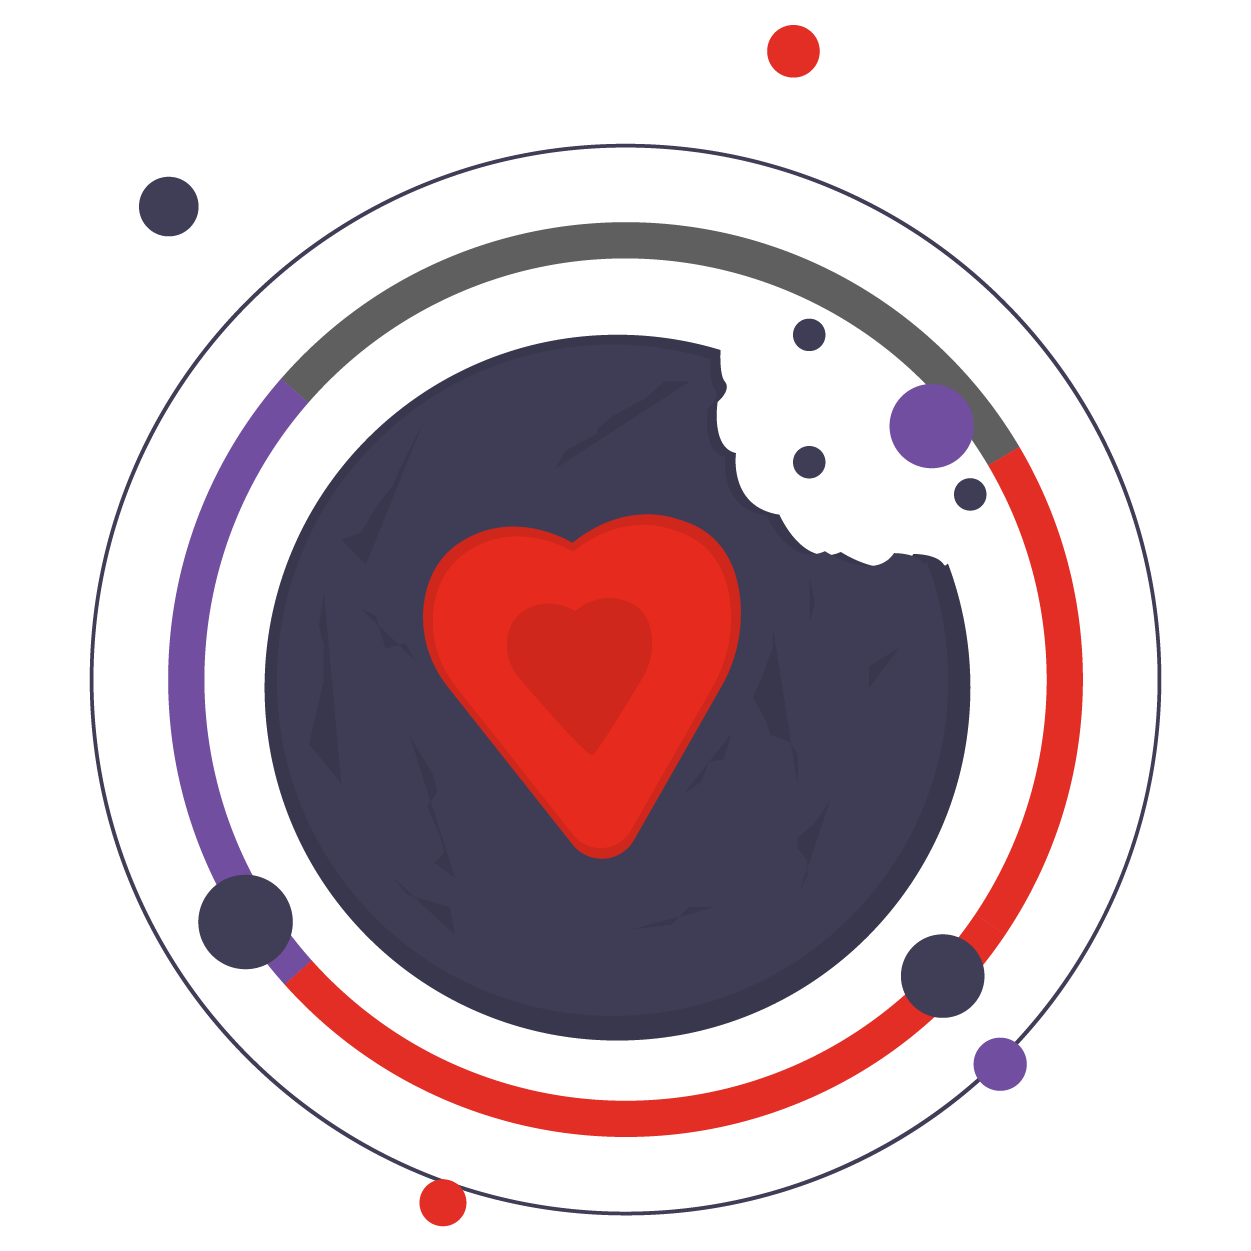 purple and red icon of a heart crumbling away for motivational speaker topic about honesty